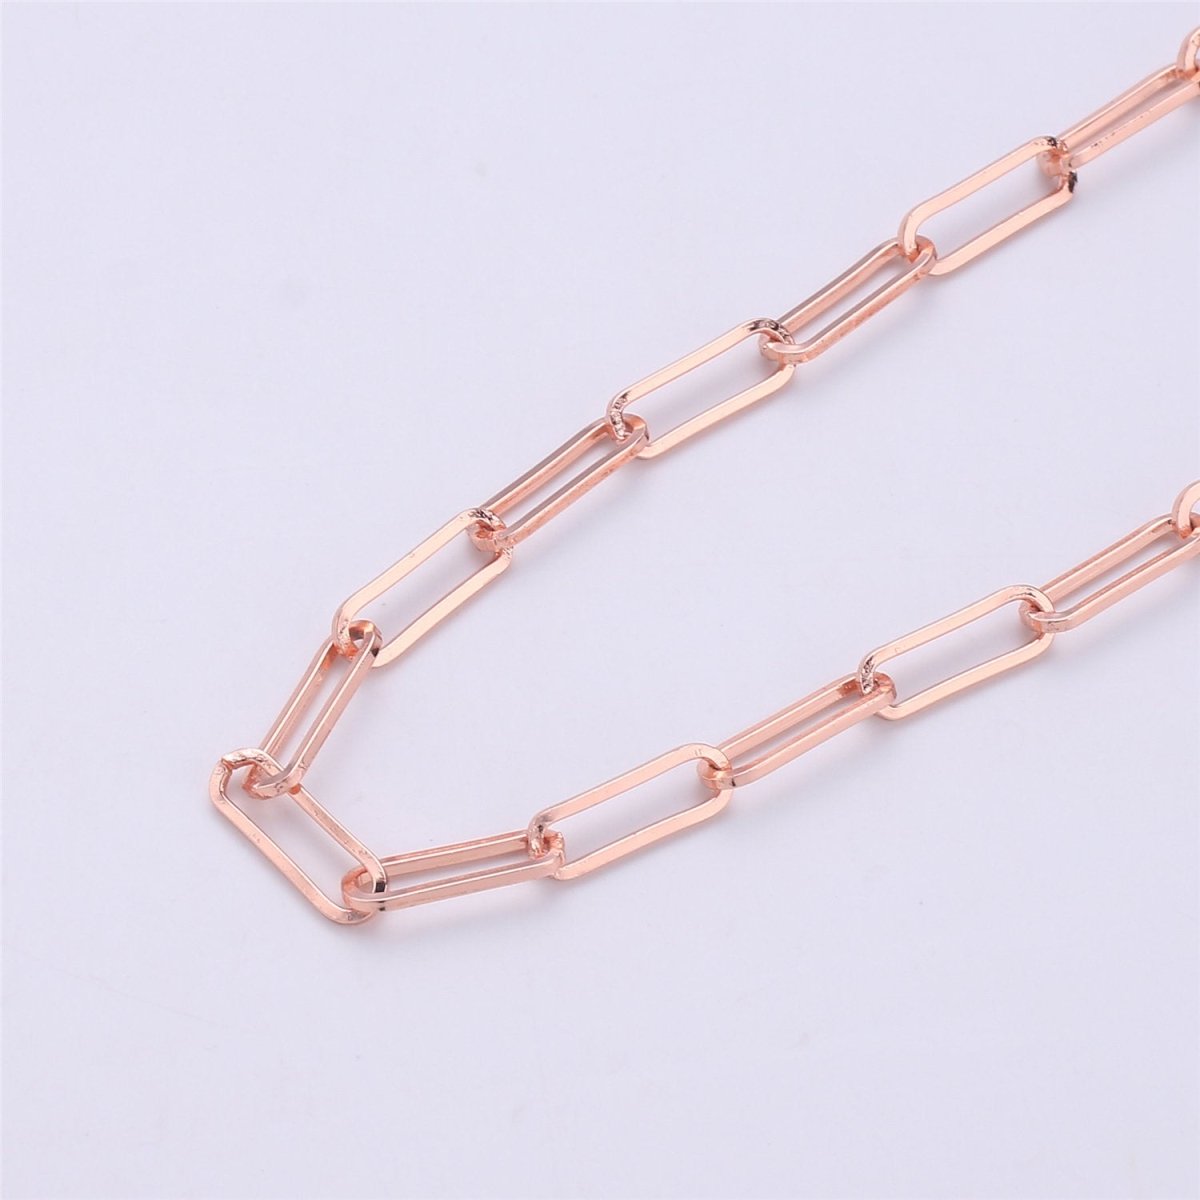 15X5mm 24K Gold Filled Chain, Black, Silver, Rose Gold Paperclip Elongated Chain 1mm Thick For Necklace Bracelet Anklet Component Supply | ROLL-057, ROLL-058, ROLL-059, ROLL-060 Clearance Pricing - DLUXCA